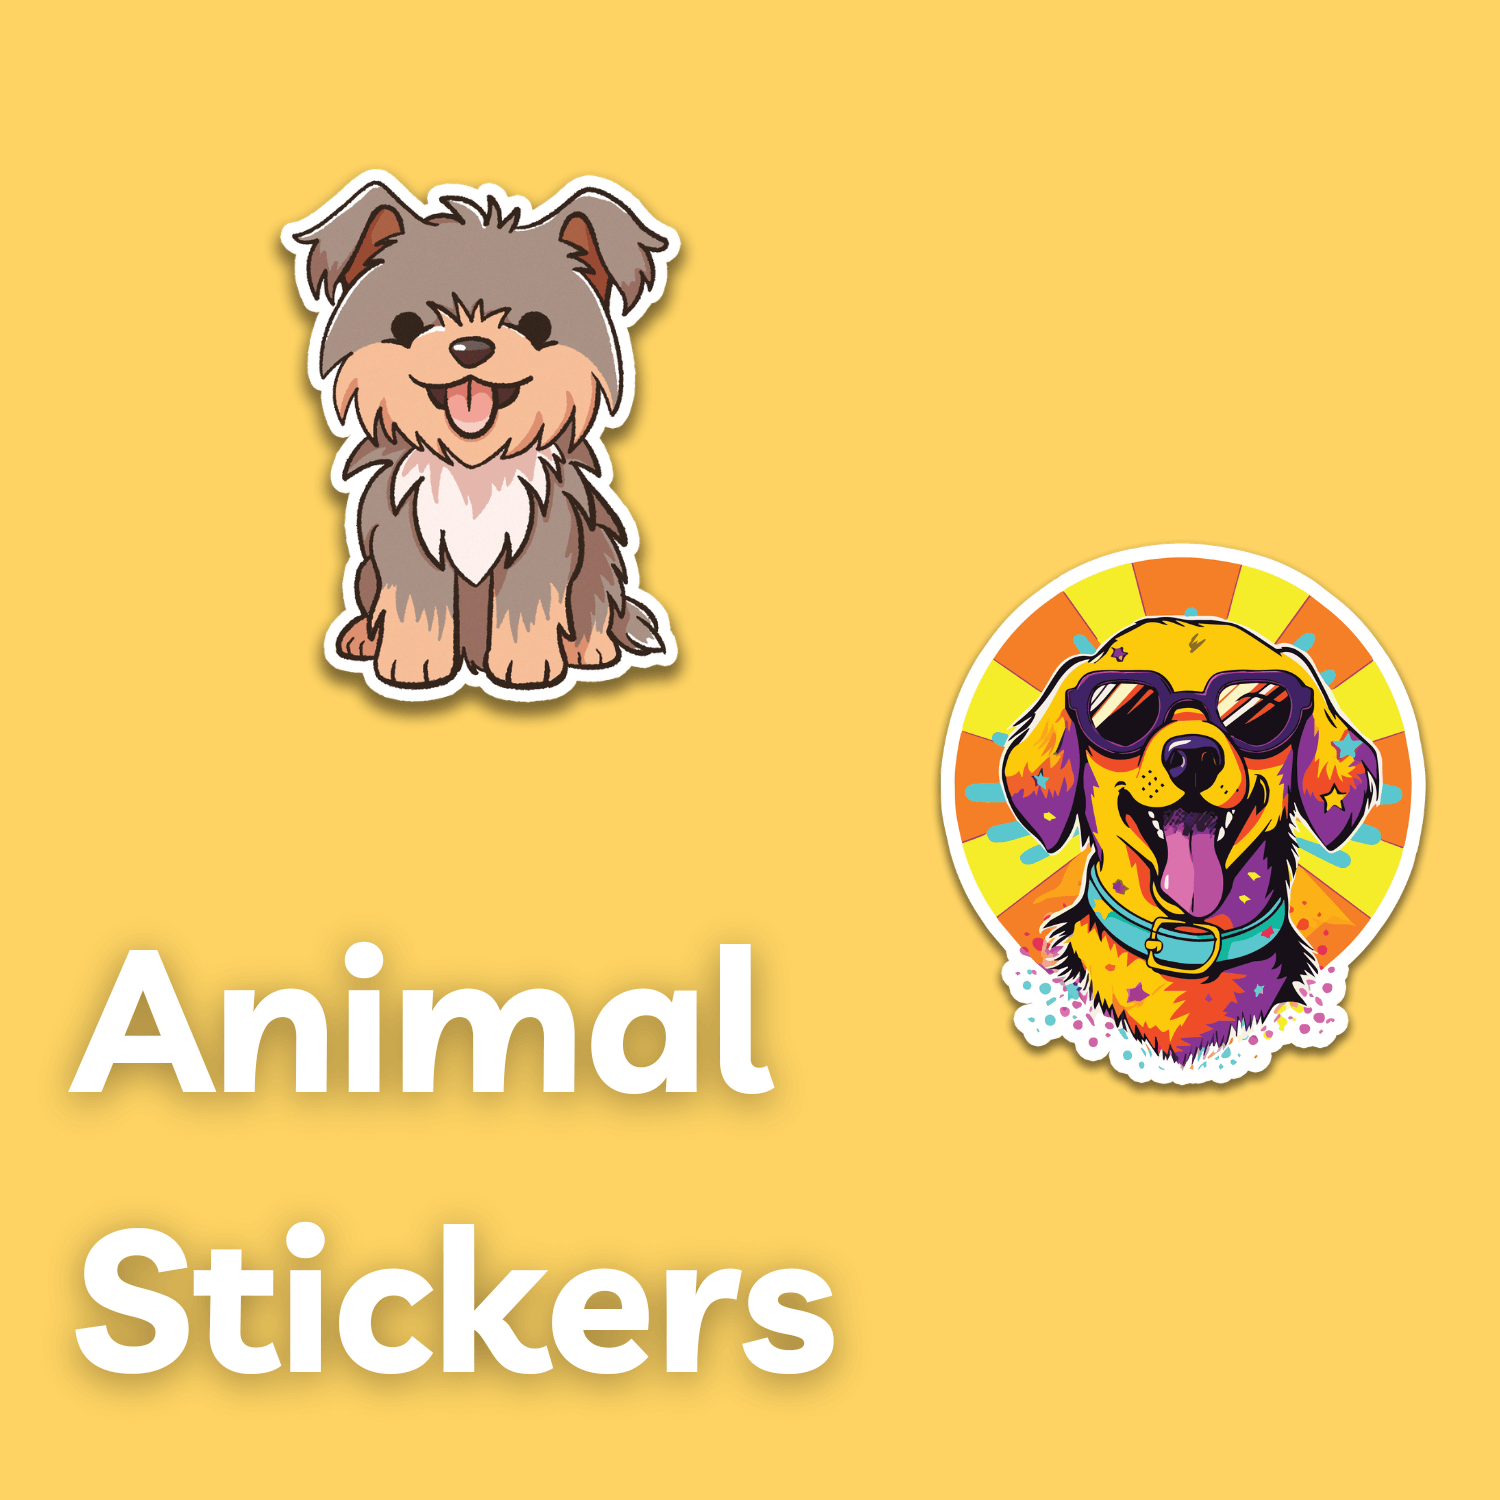 Animal Stickers Collection Image on Yellow Background with Stickers